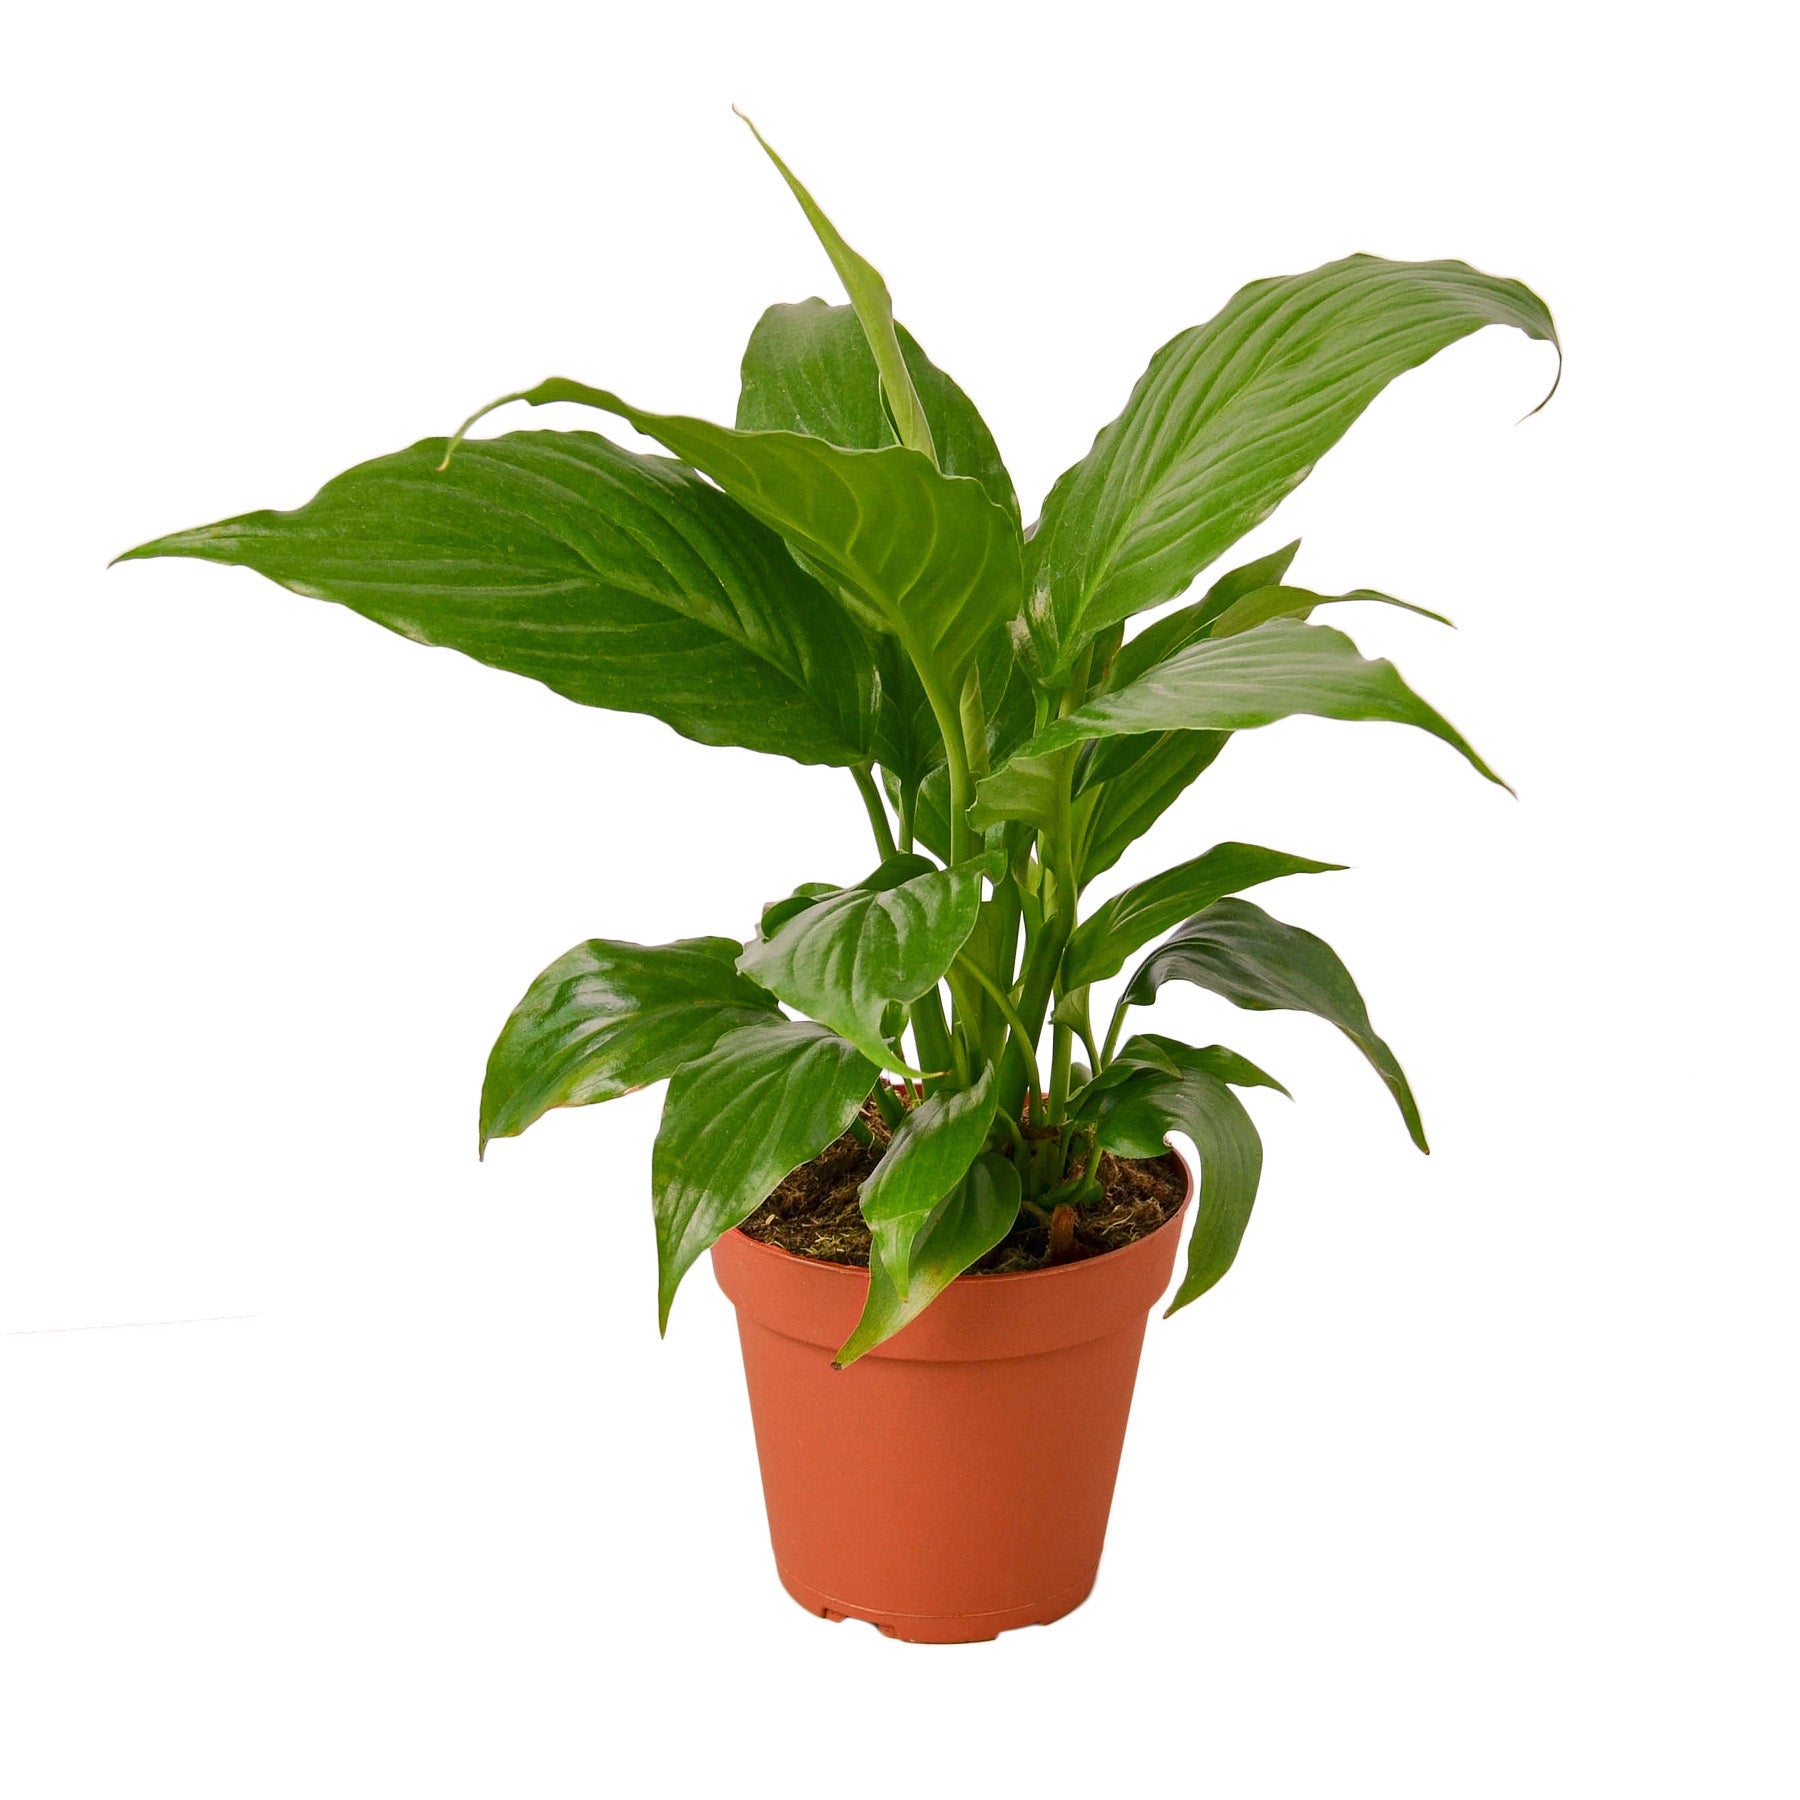 A potted plant on a white background in the best plant nursery near me.